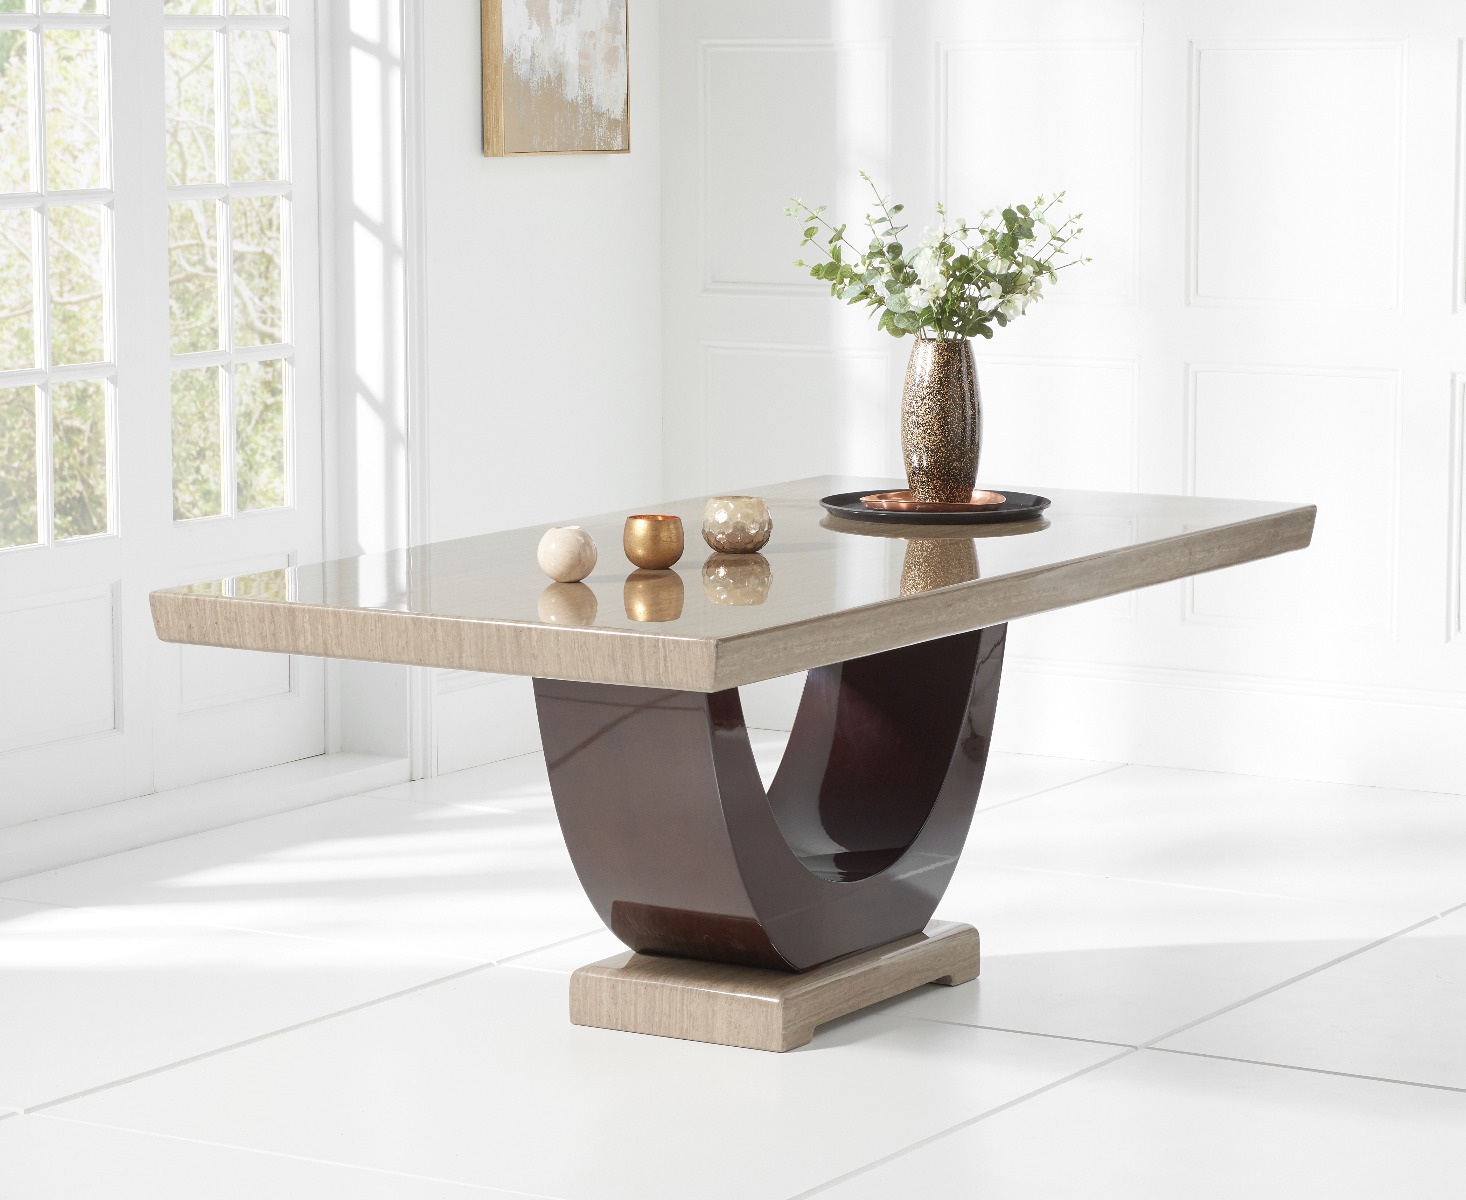 Photo 1 of Raphael 200cm brown pedestal marble dining table with 10 brown alpine chairs